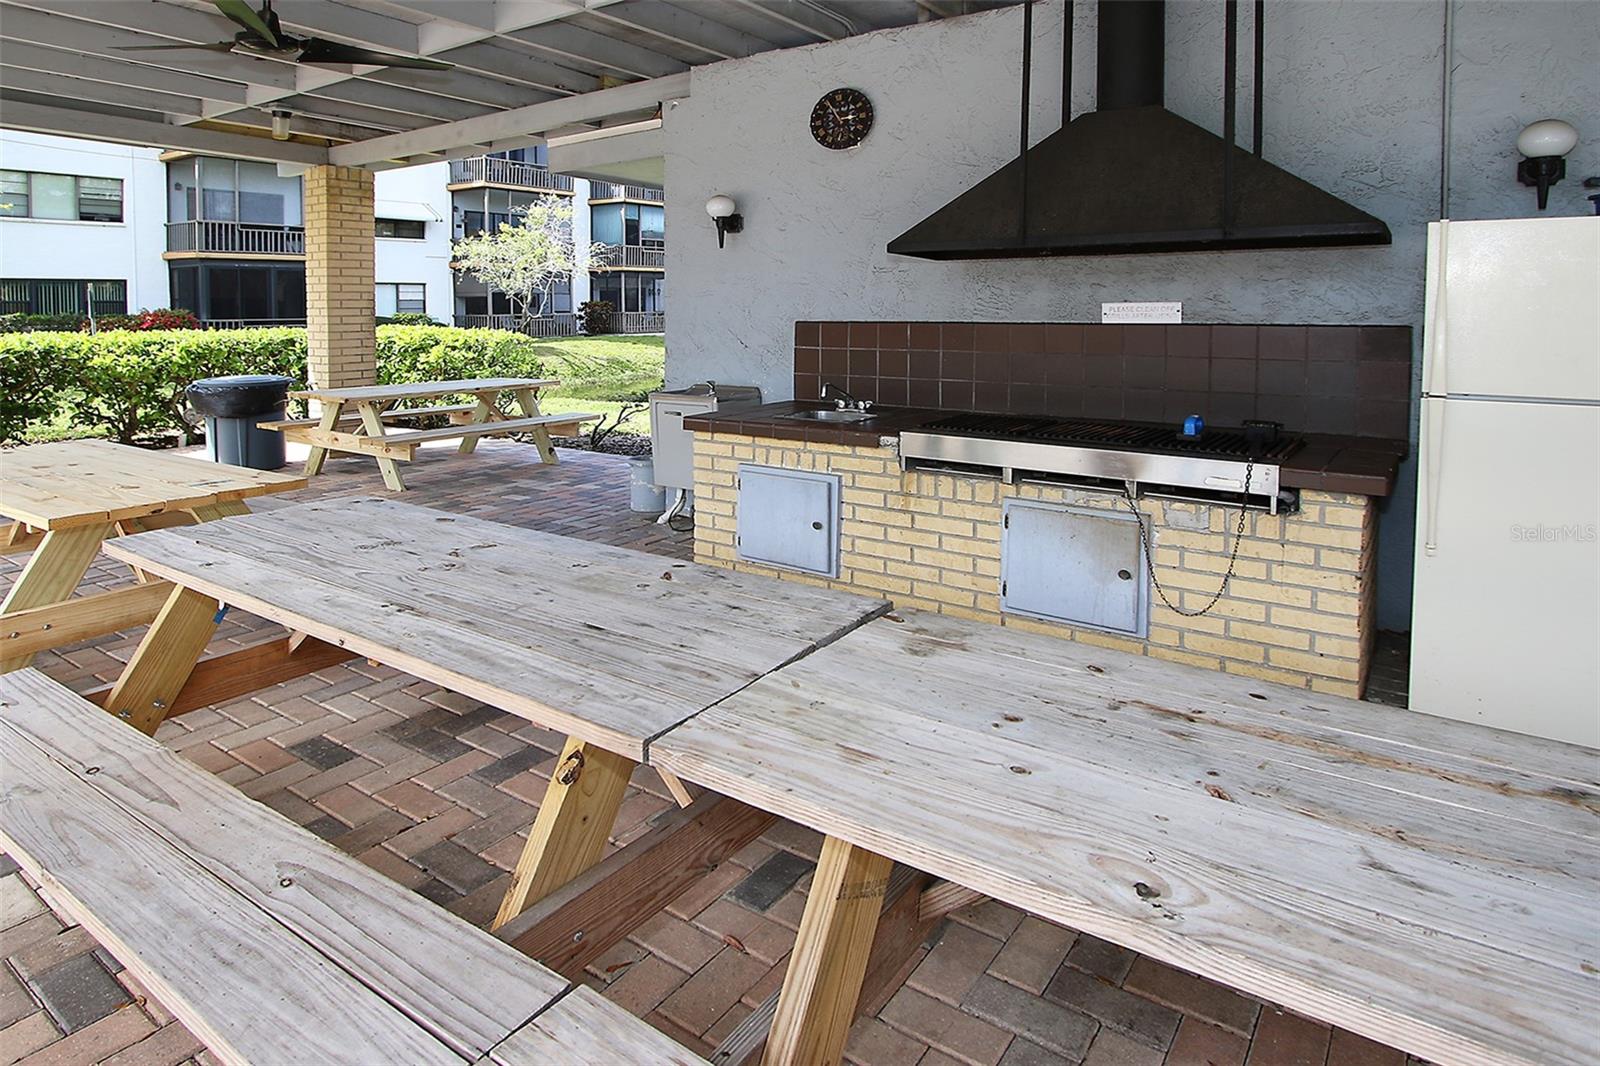 grilling stations throughout.